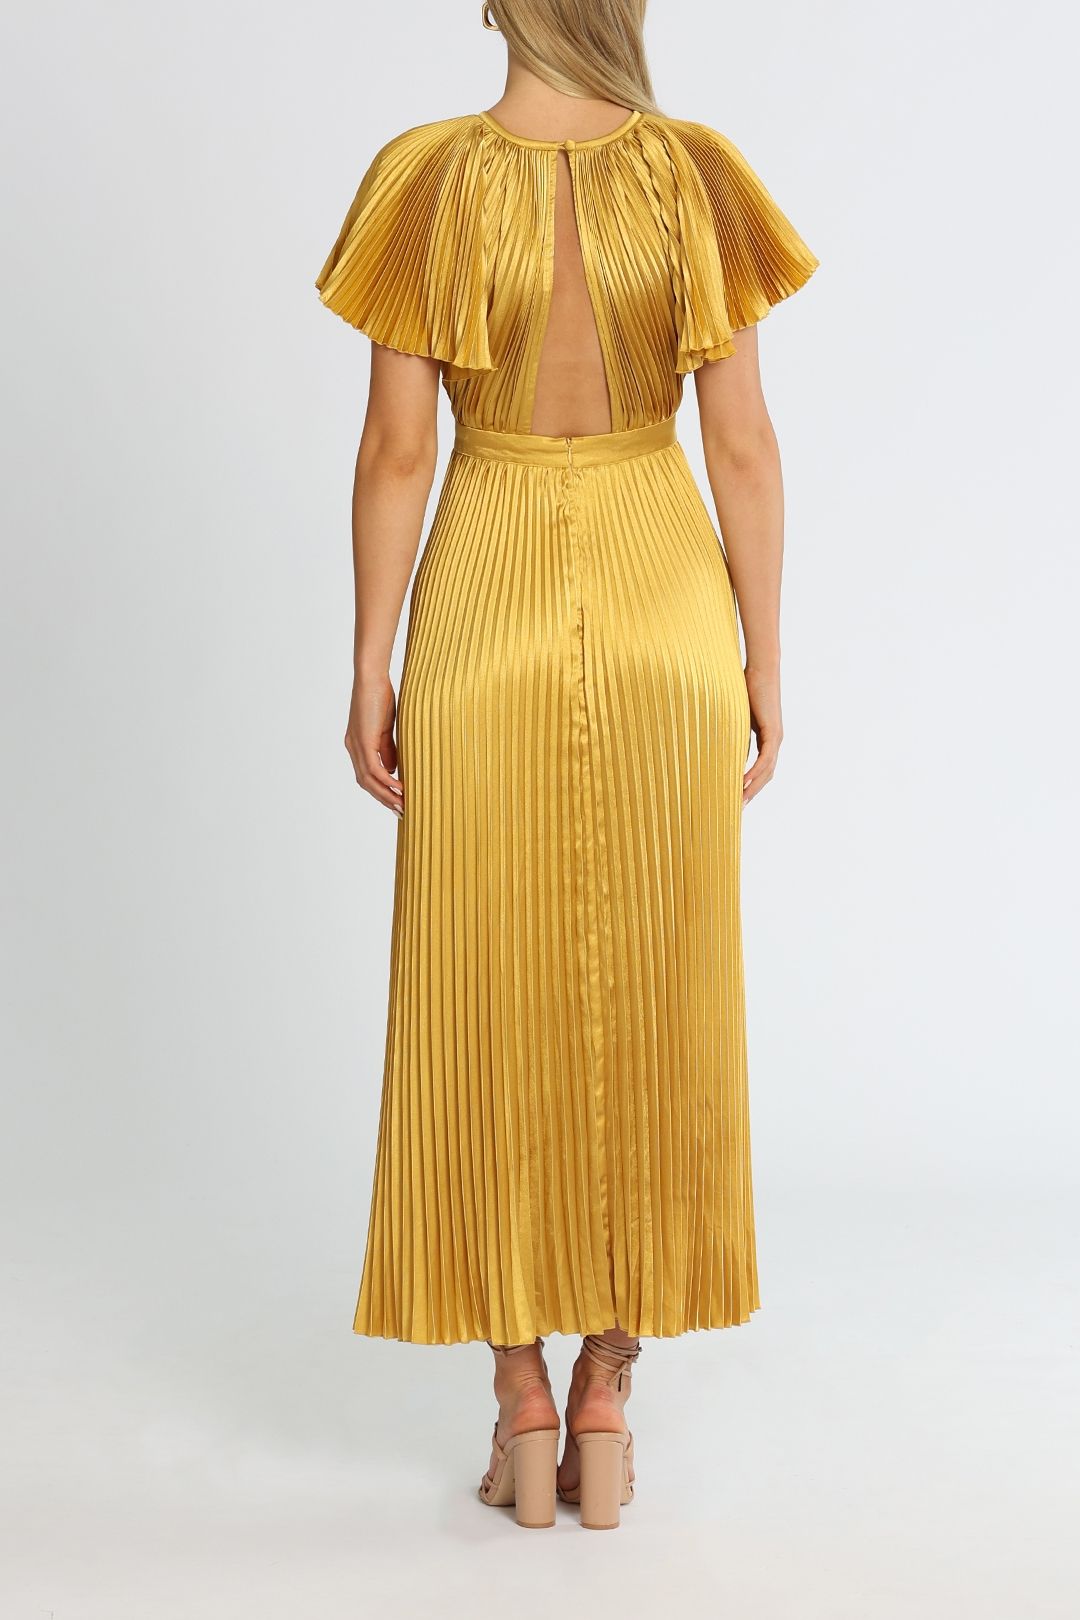 Lidee Theatre Gown Marigold Cutout